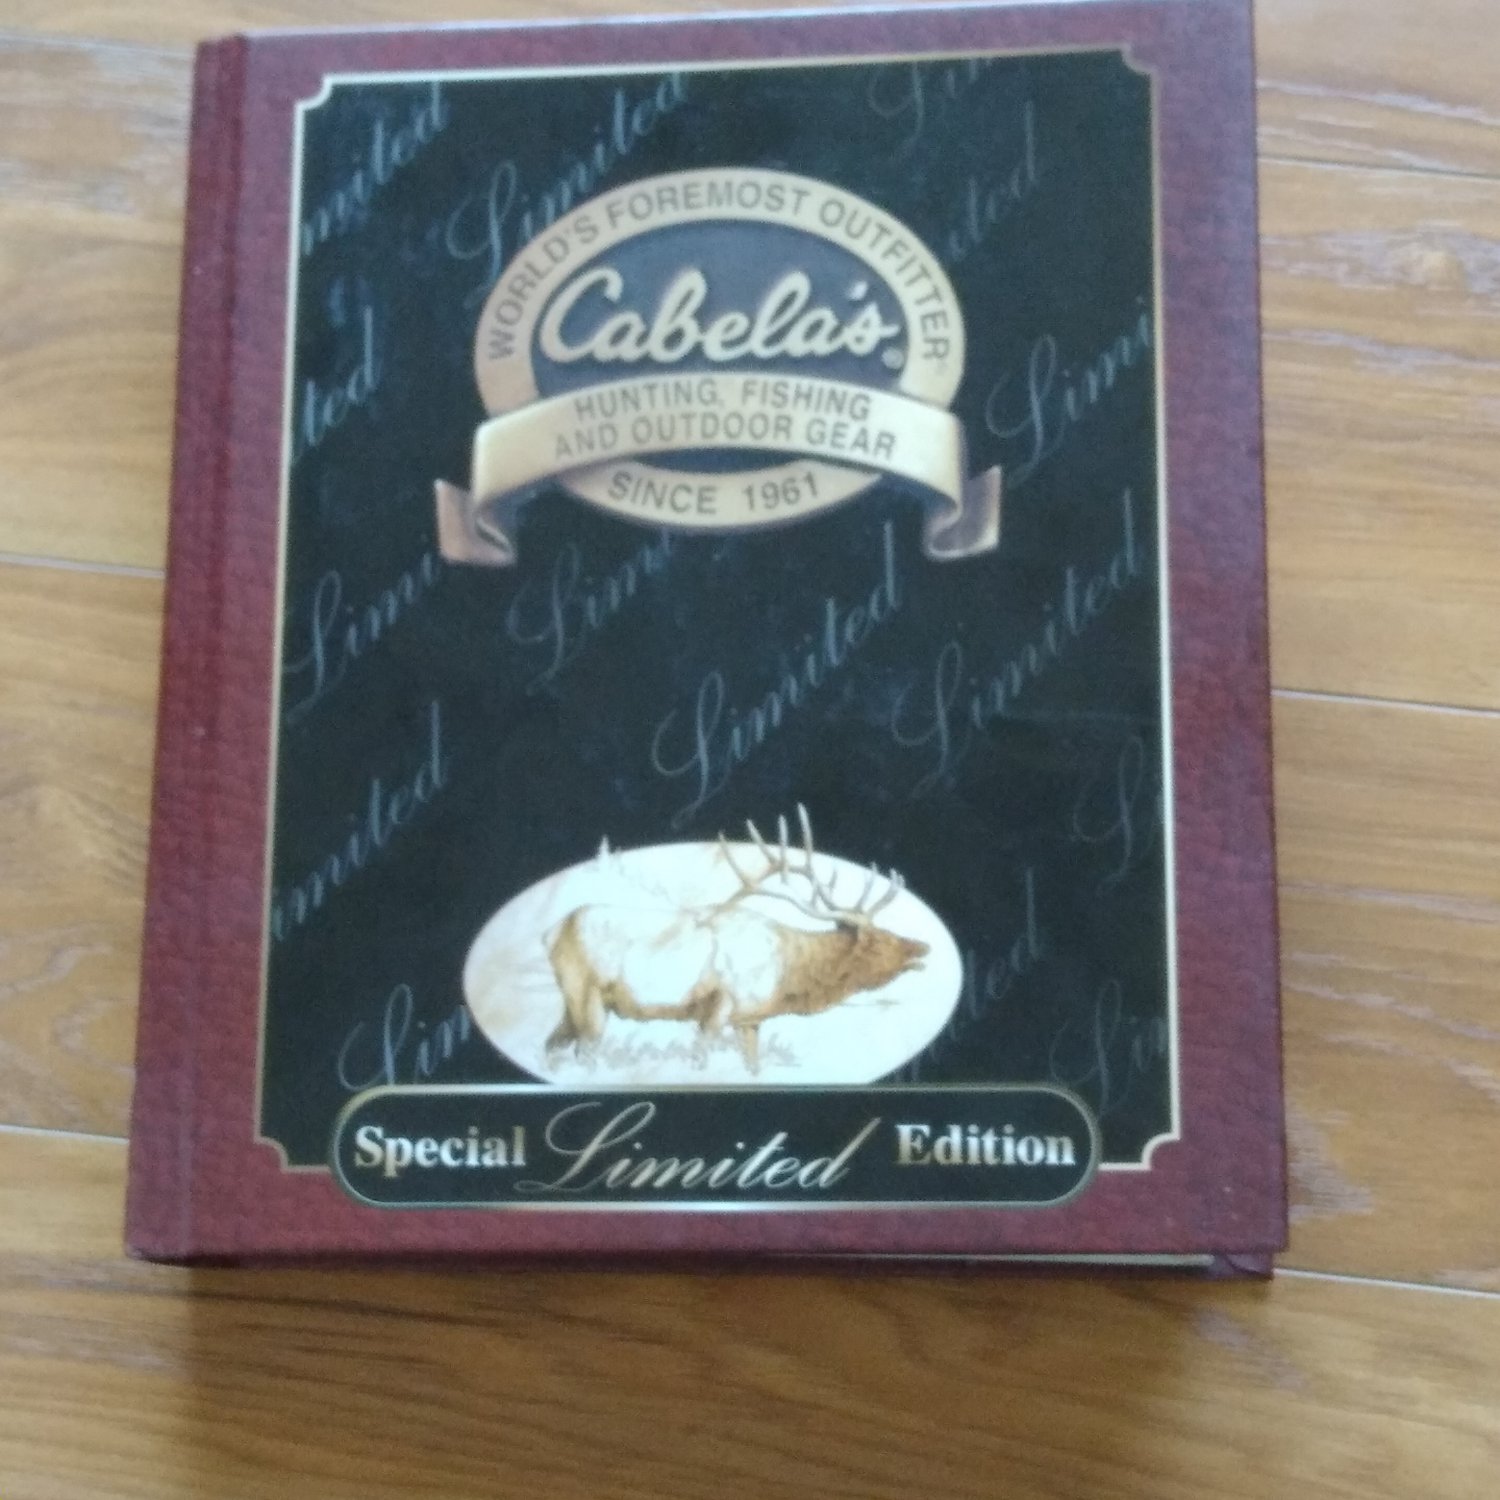 Cabela's Special Limited Fall Edition Volume IV 2004 Catalog Hardcover